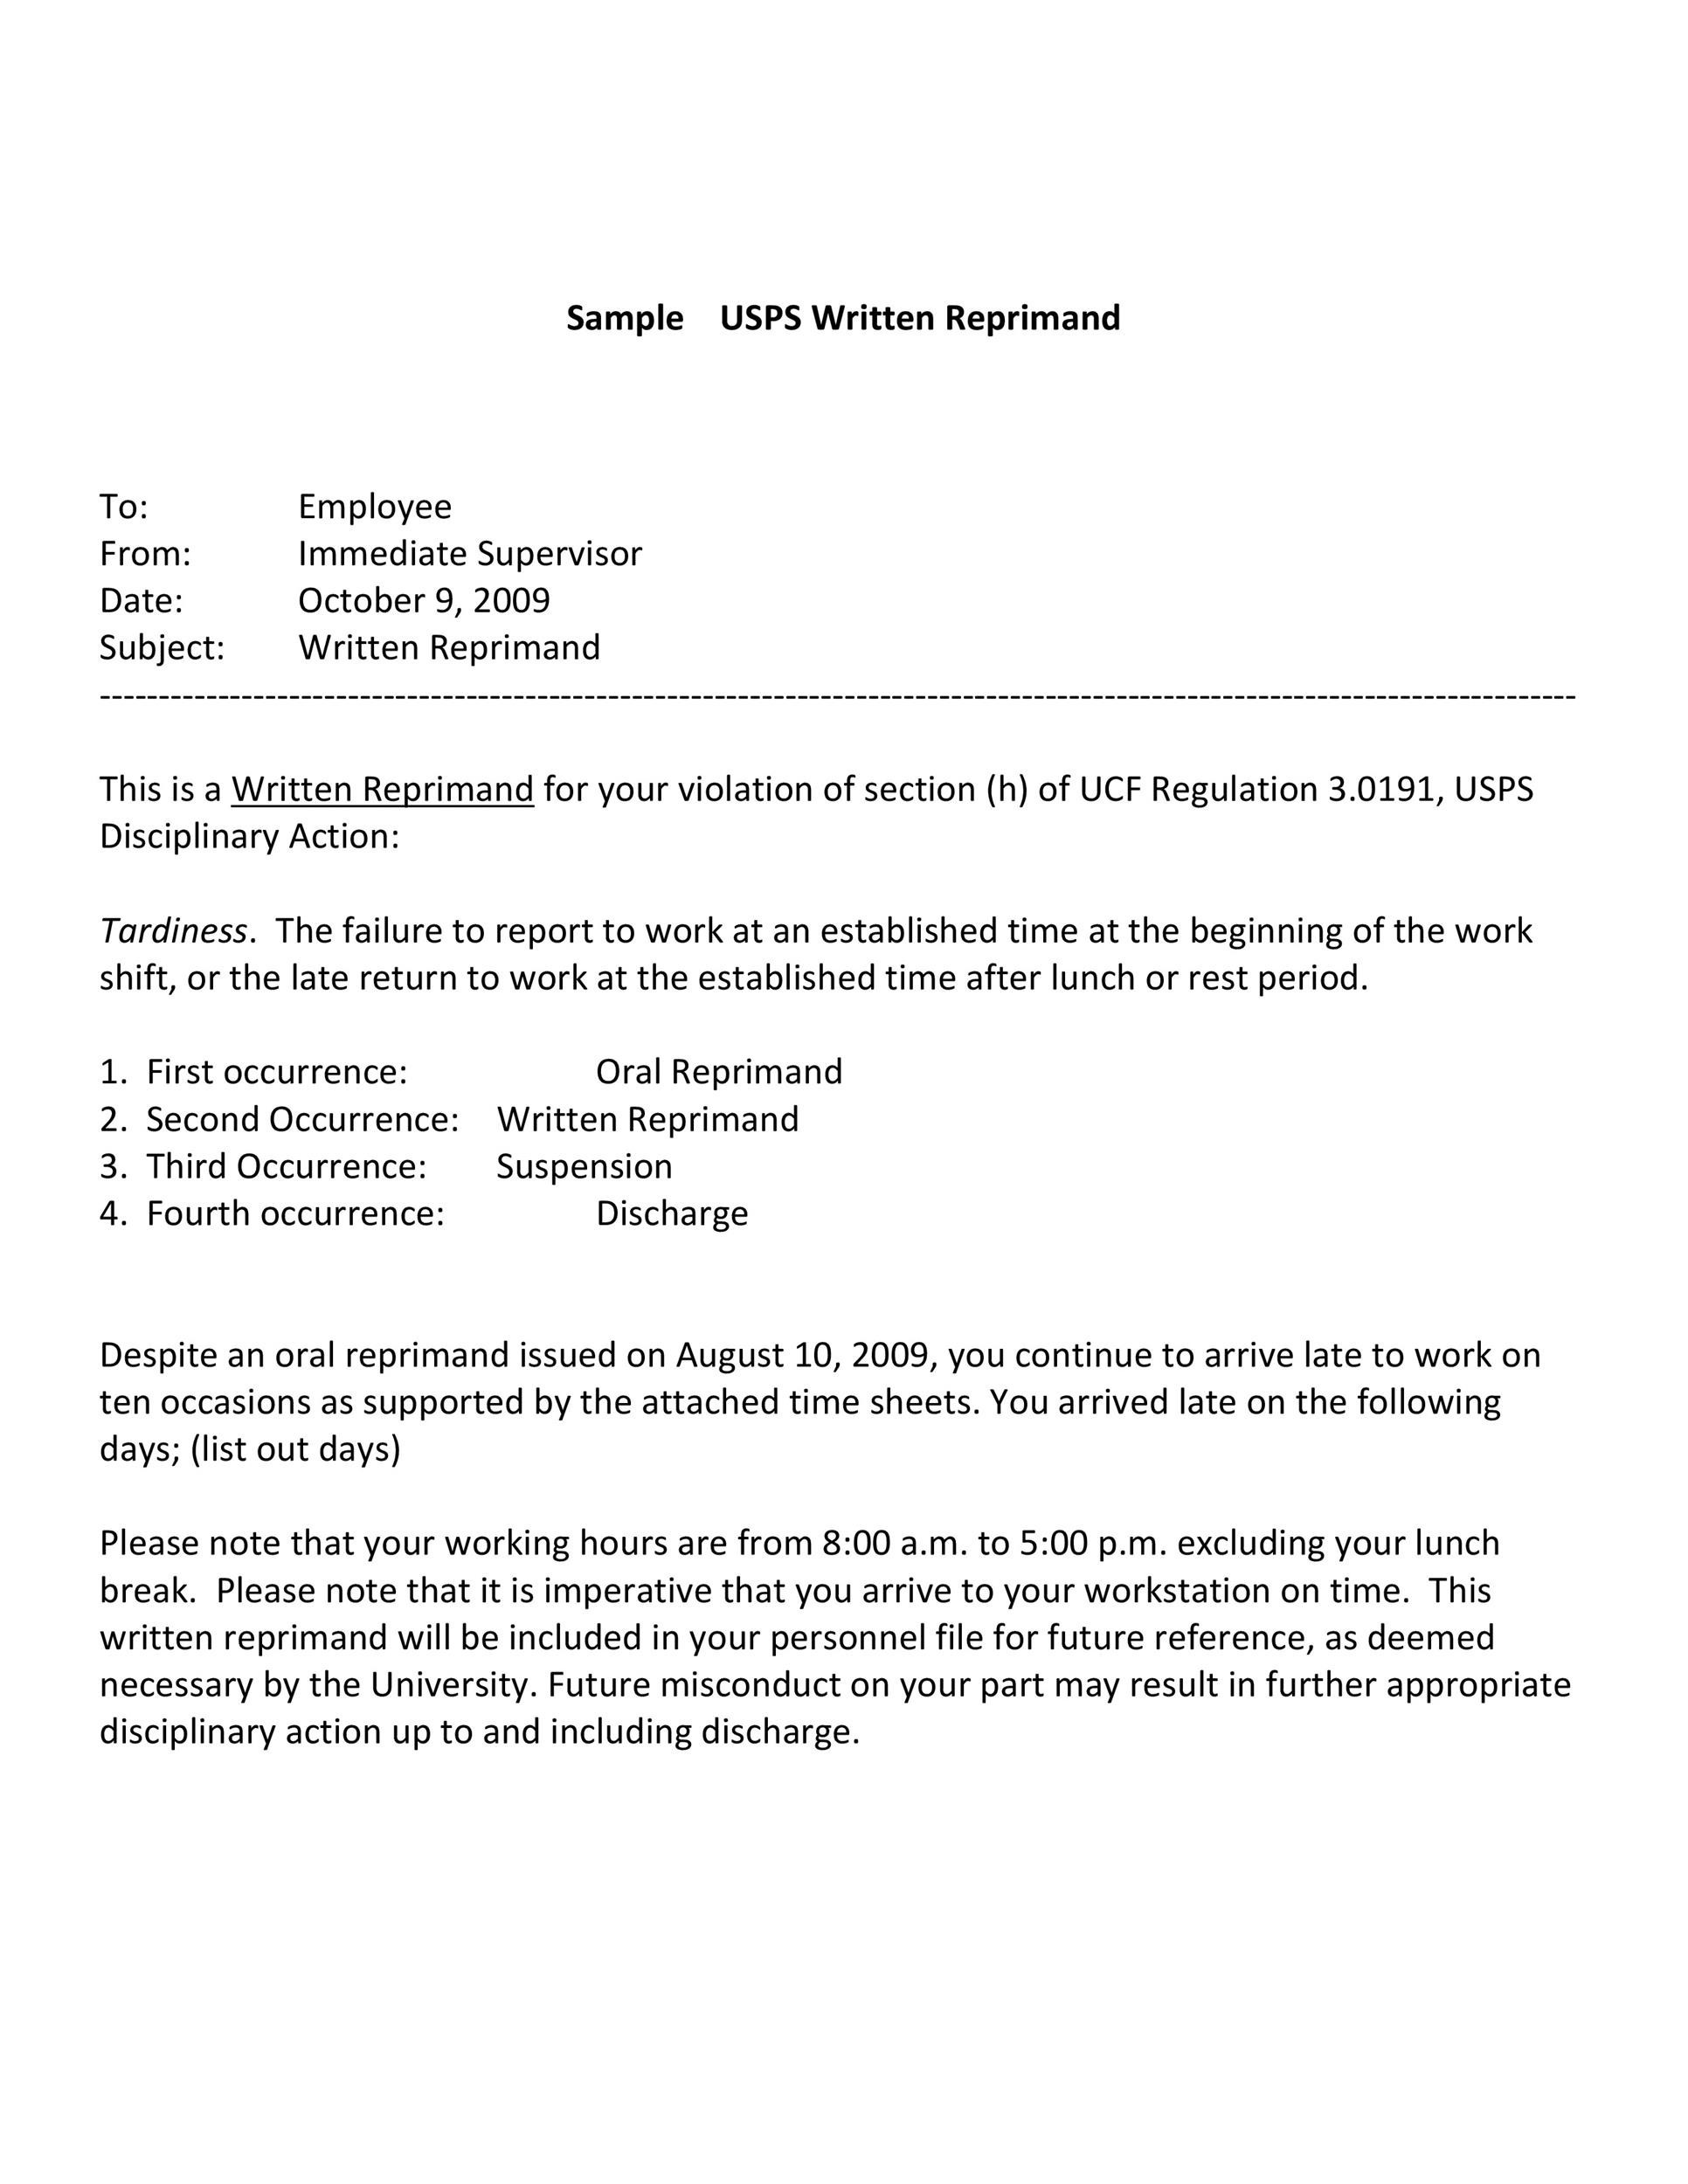 23 Effective Letters of Reprimand Templates (MS Word) ᐅ TemplateLab